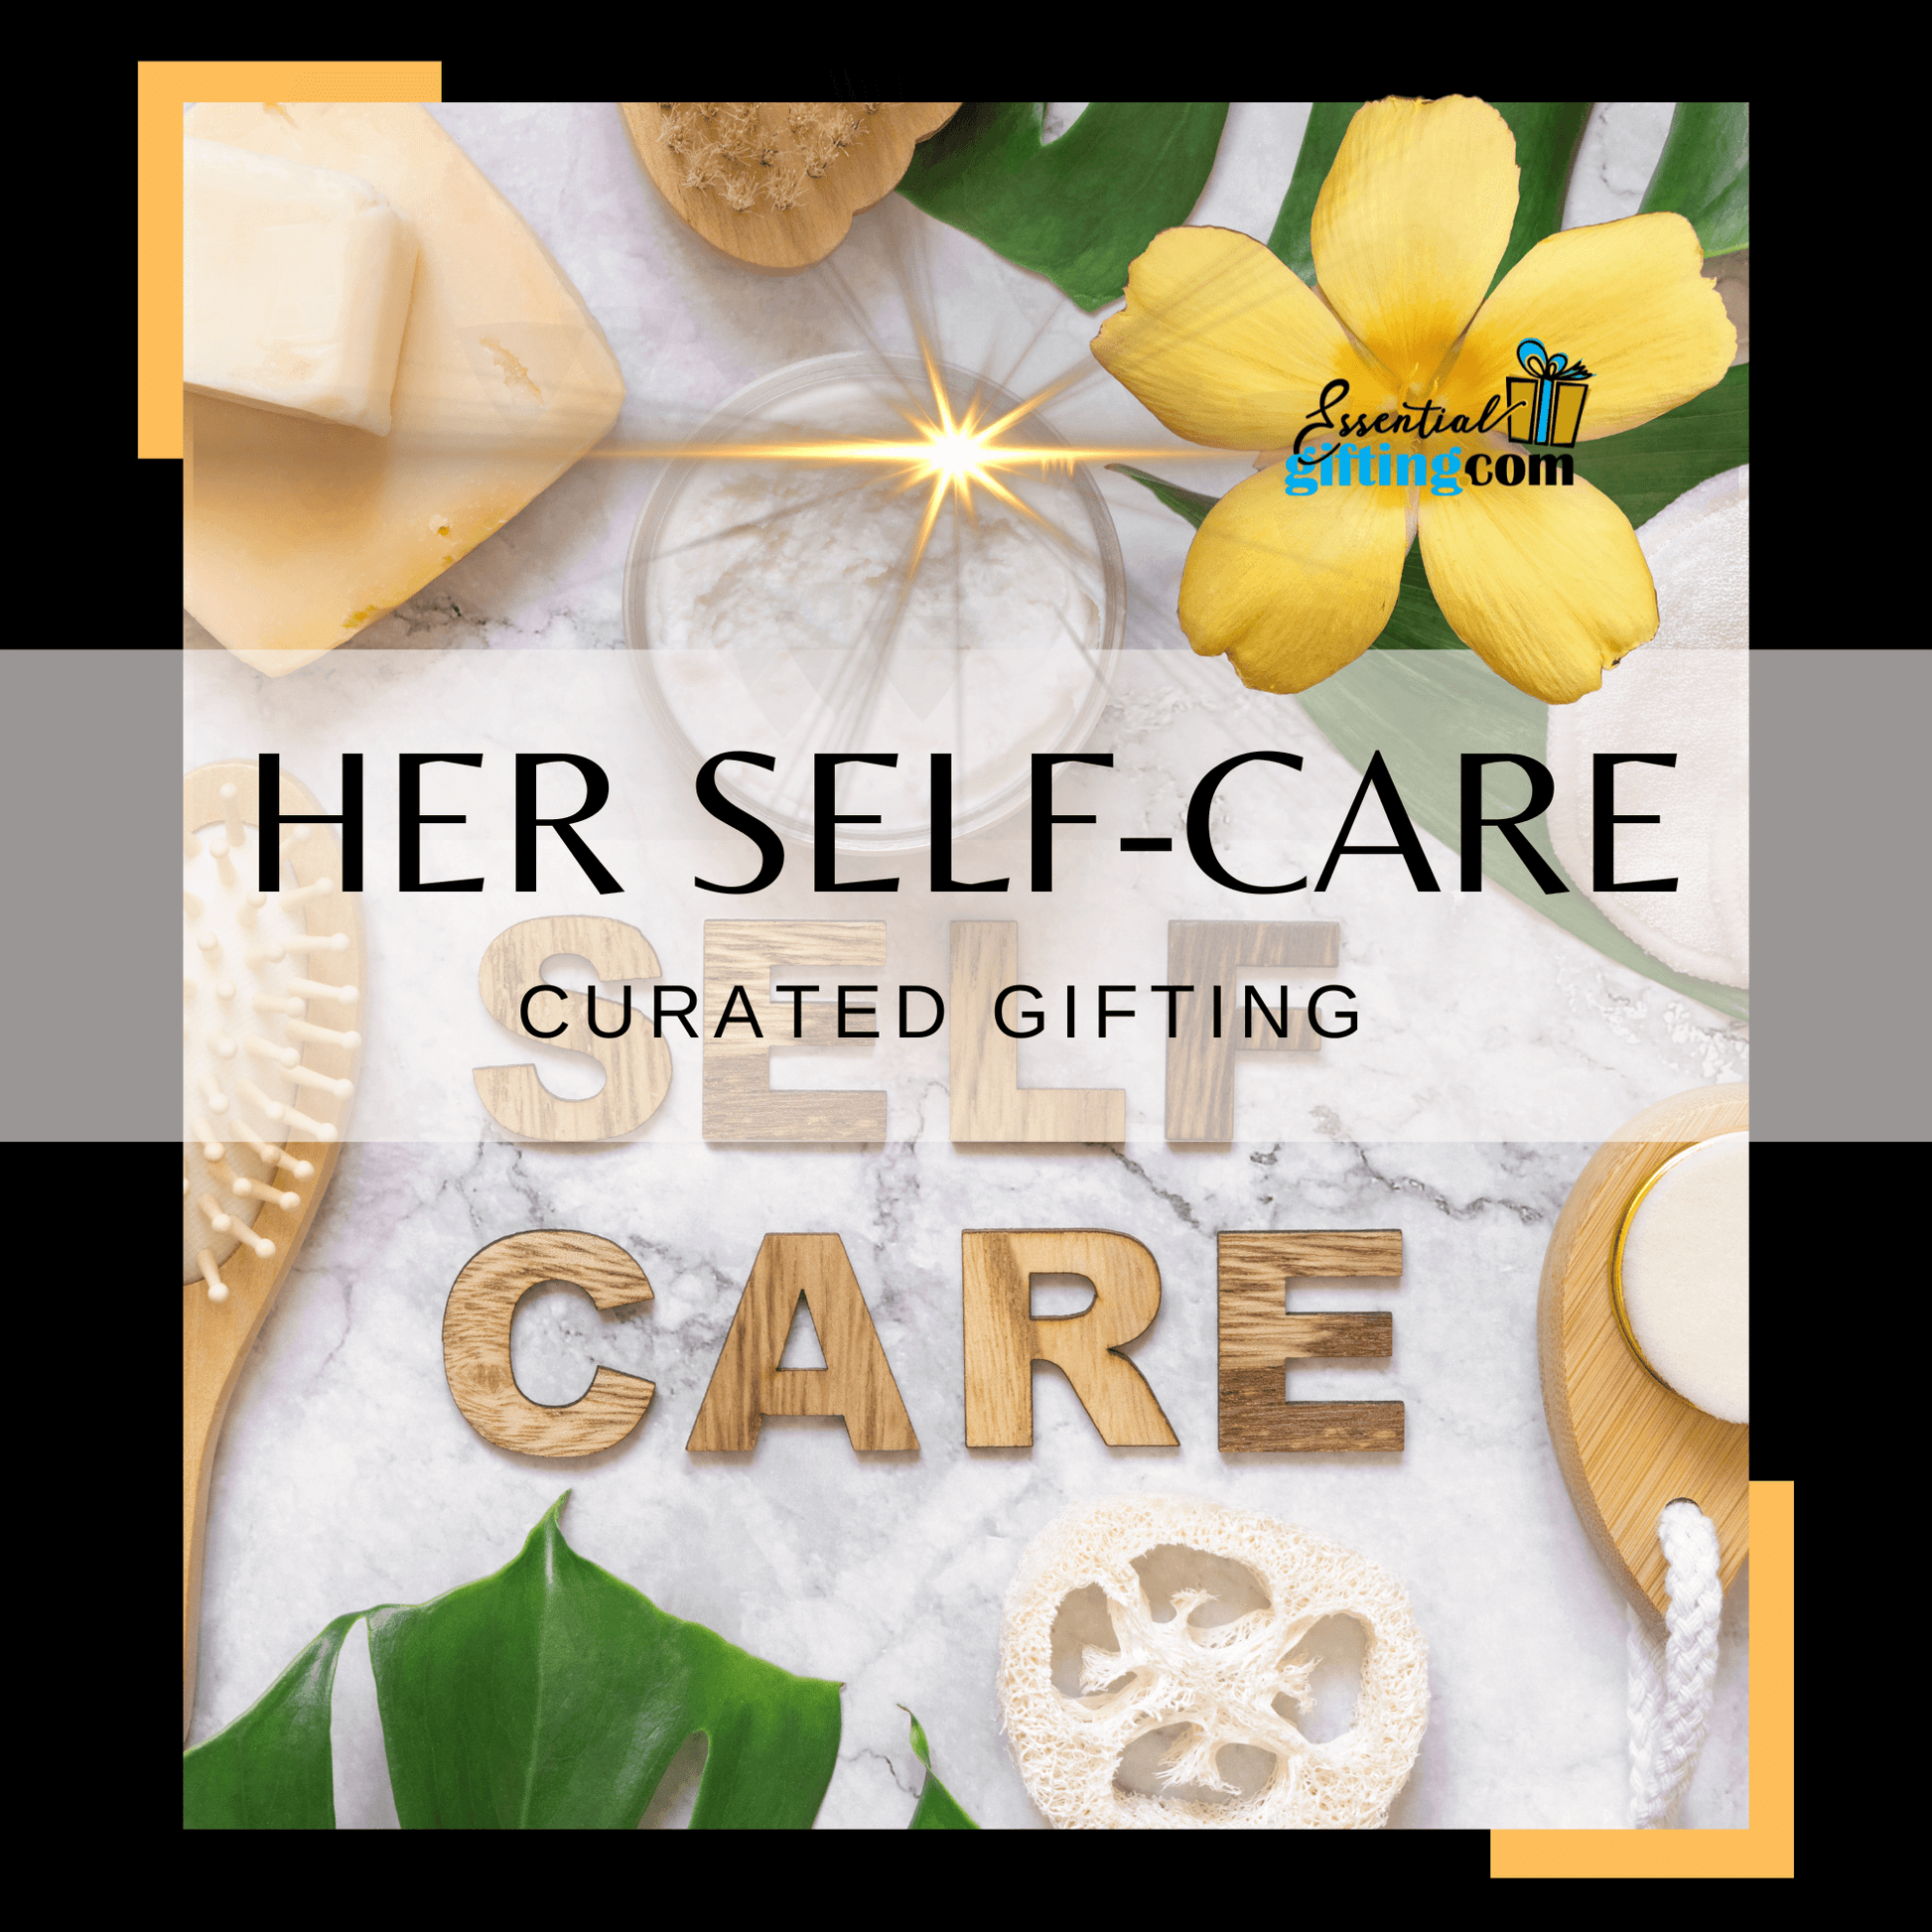 Gift Box - Her Self-care, Essentialgifting